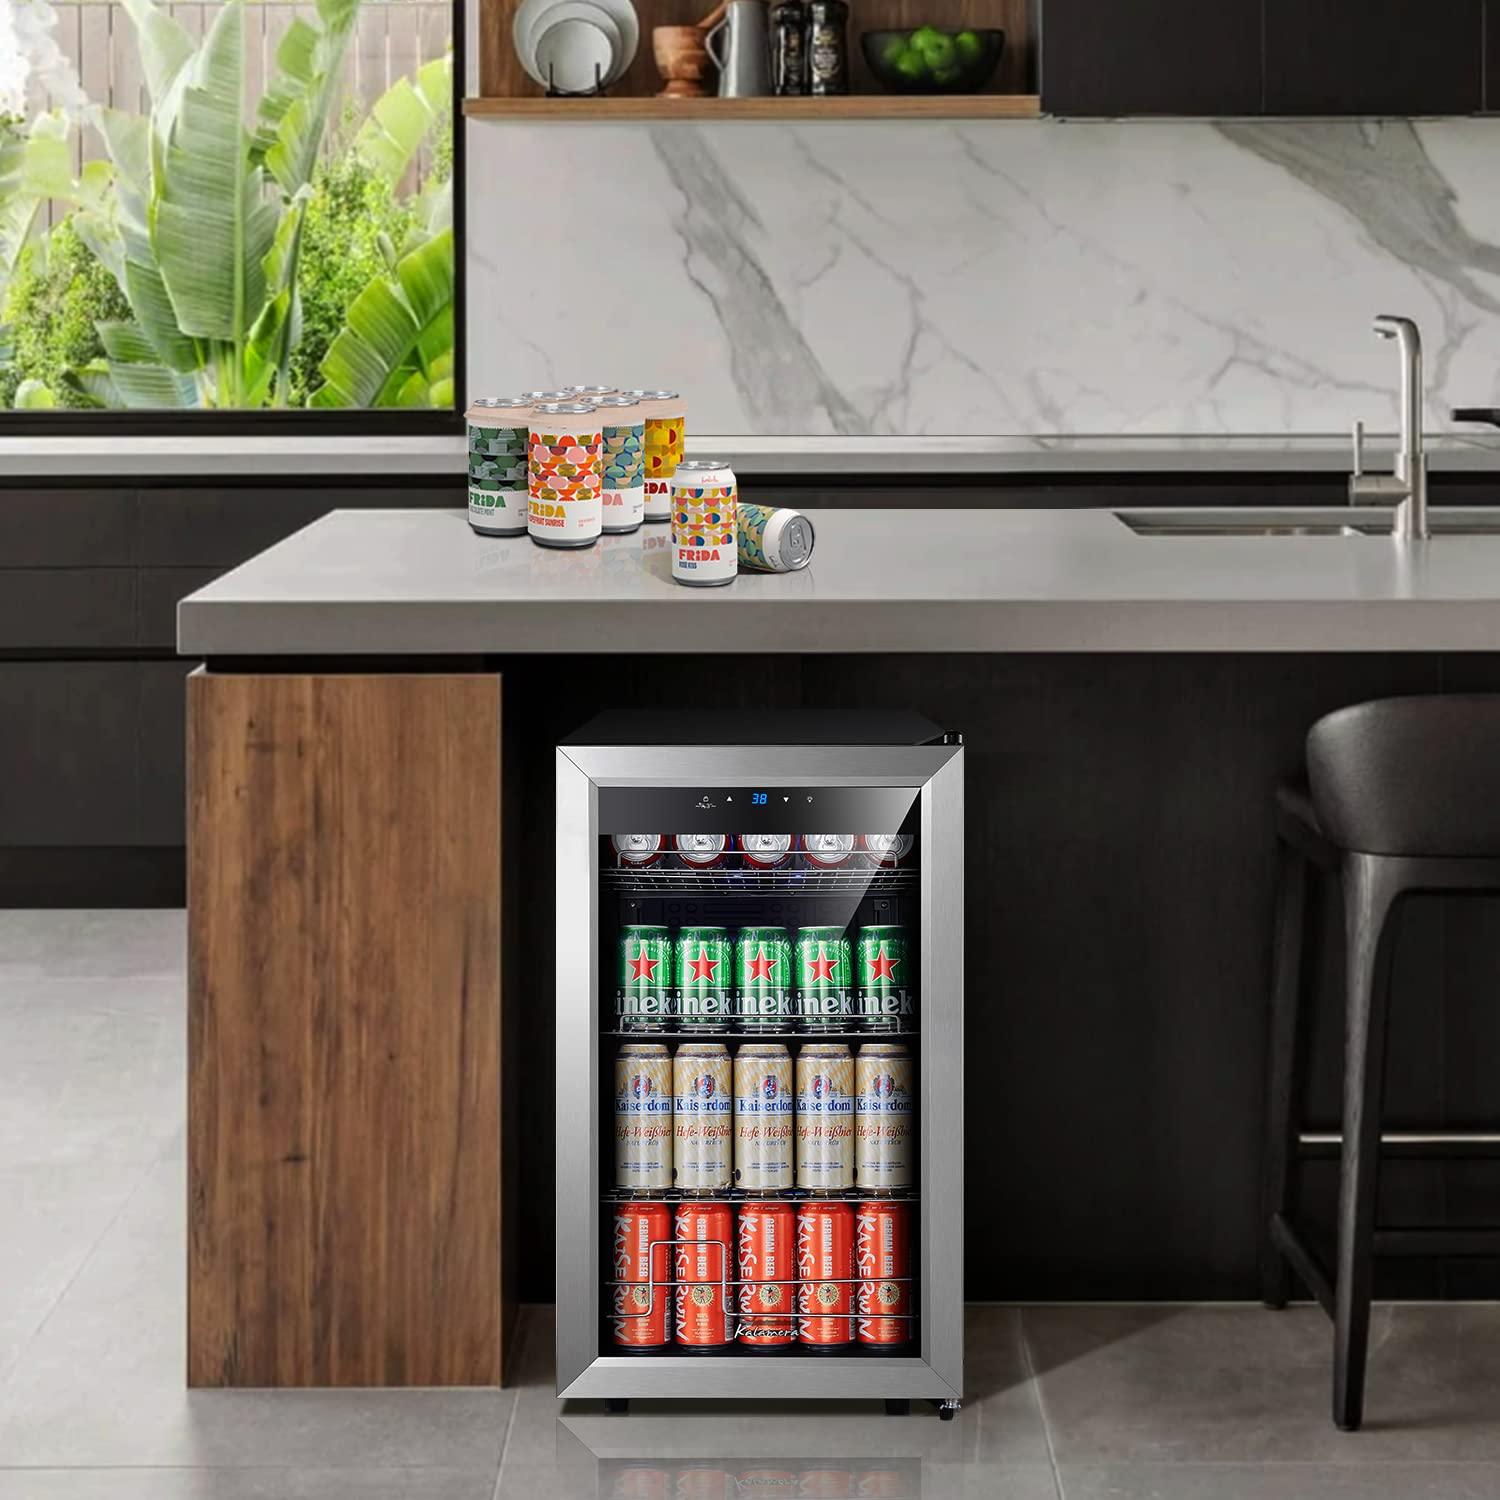 Kalamera Mini Beverage Refrigerator Freestanding- 102 Cans Capacity Beverage Cooler- for Soda, Water, Beer or Wine - For Kitchen or Bar with Whit Interior Light - CookCave